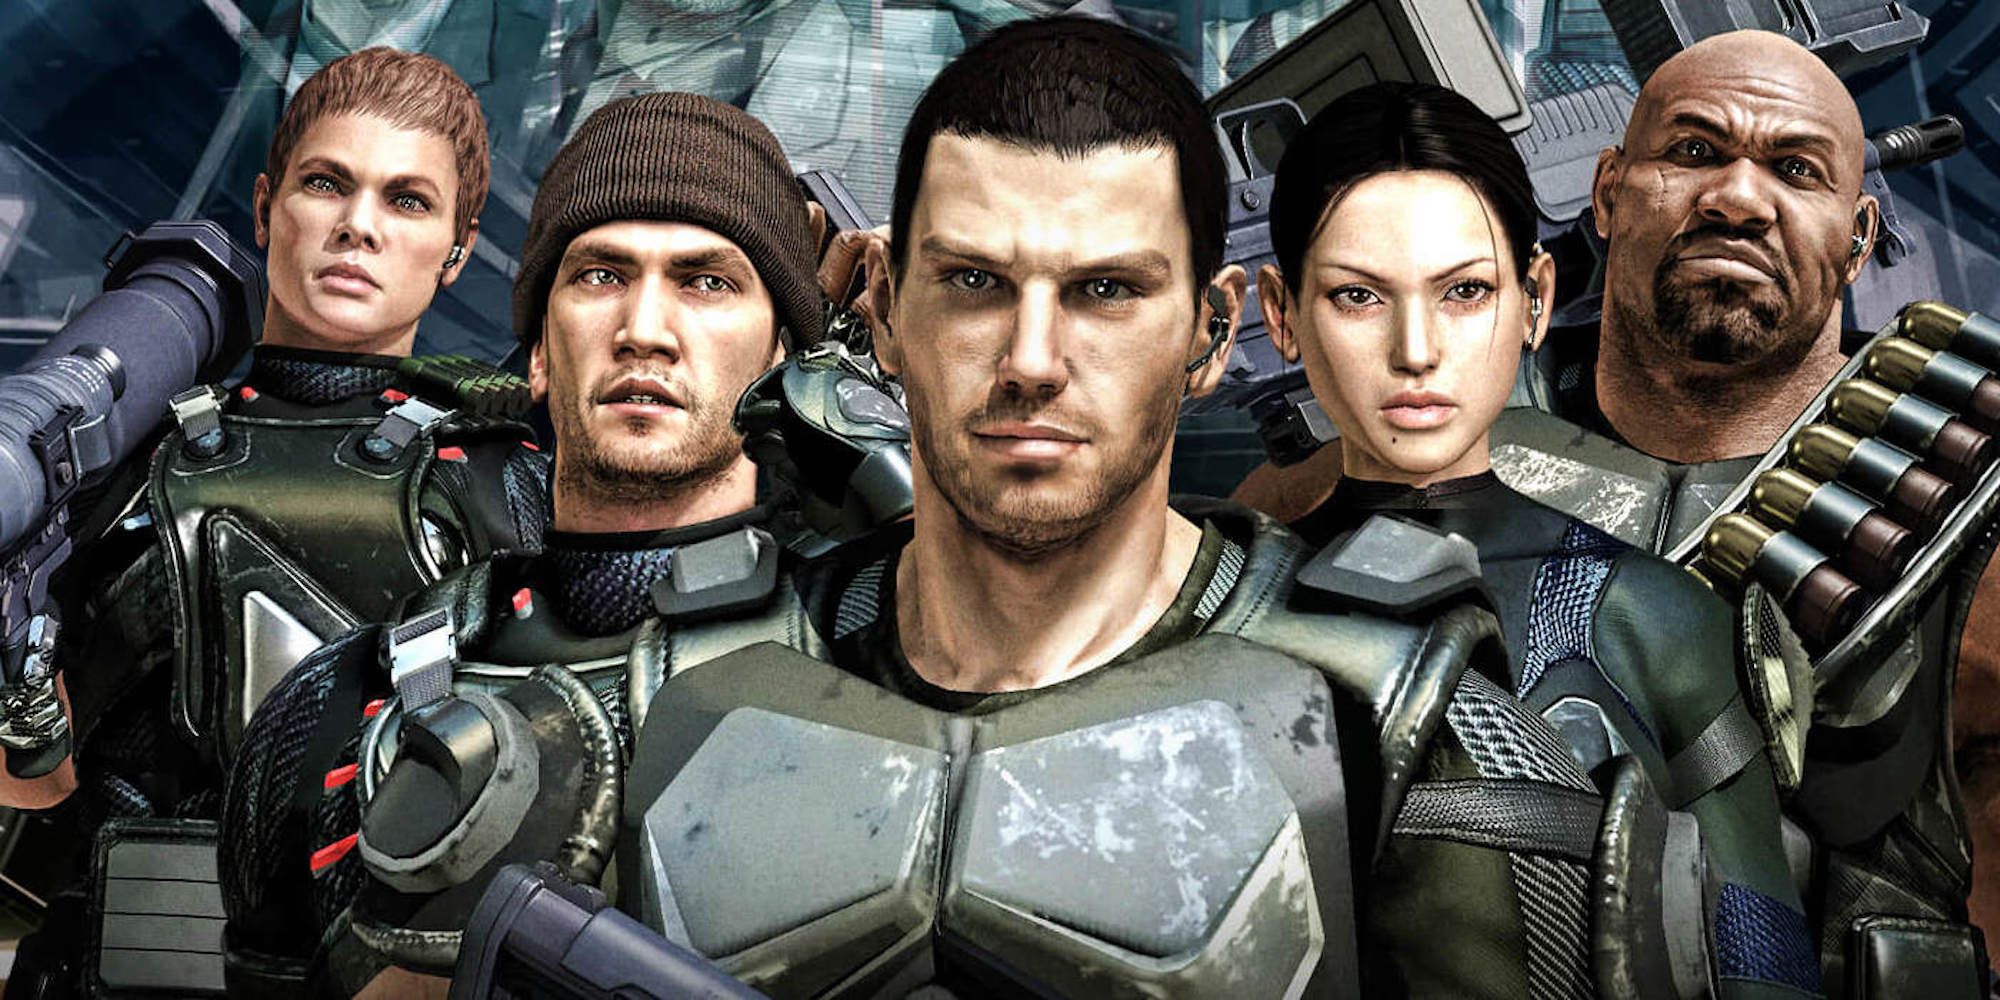 Promotional art featuring characters from Binary Domain